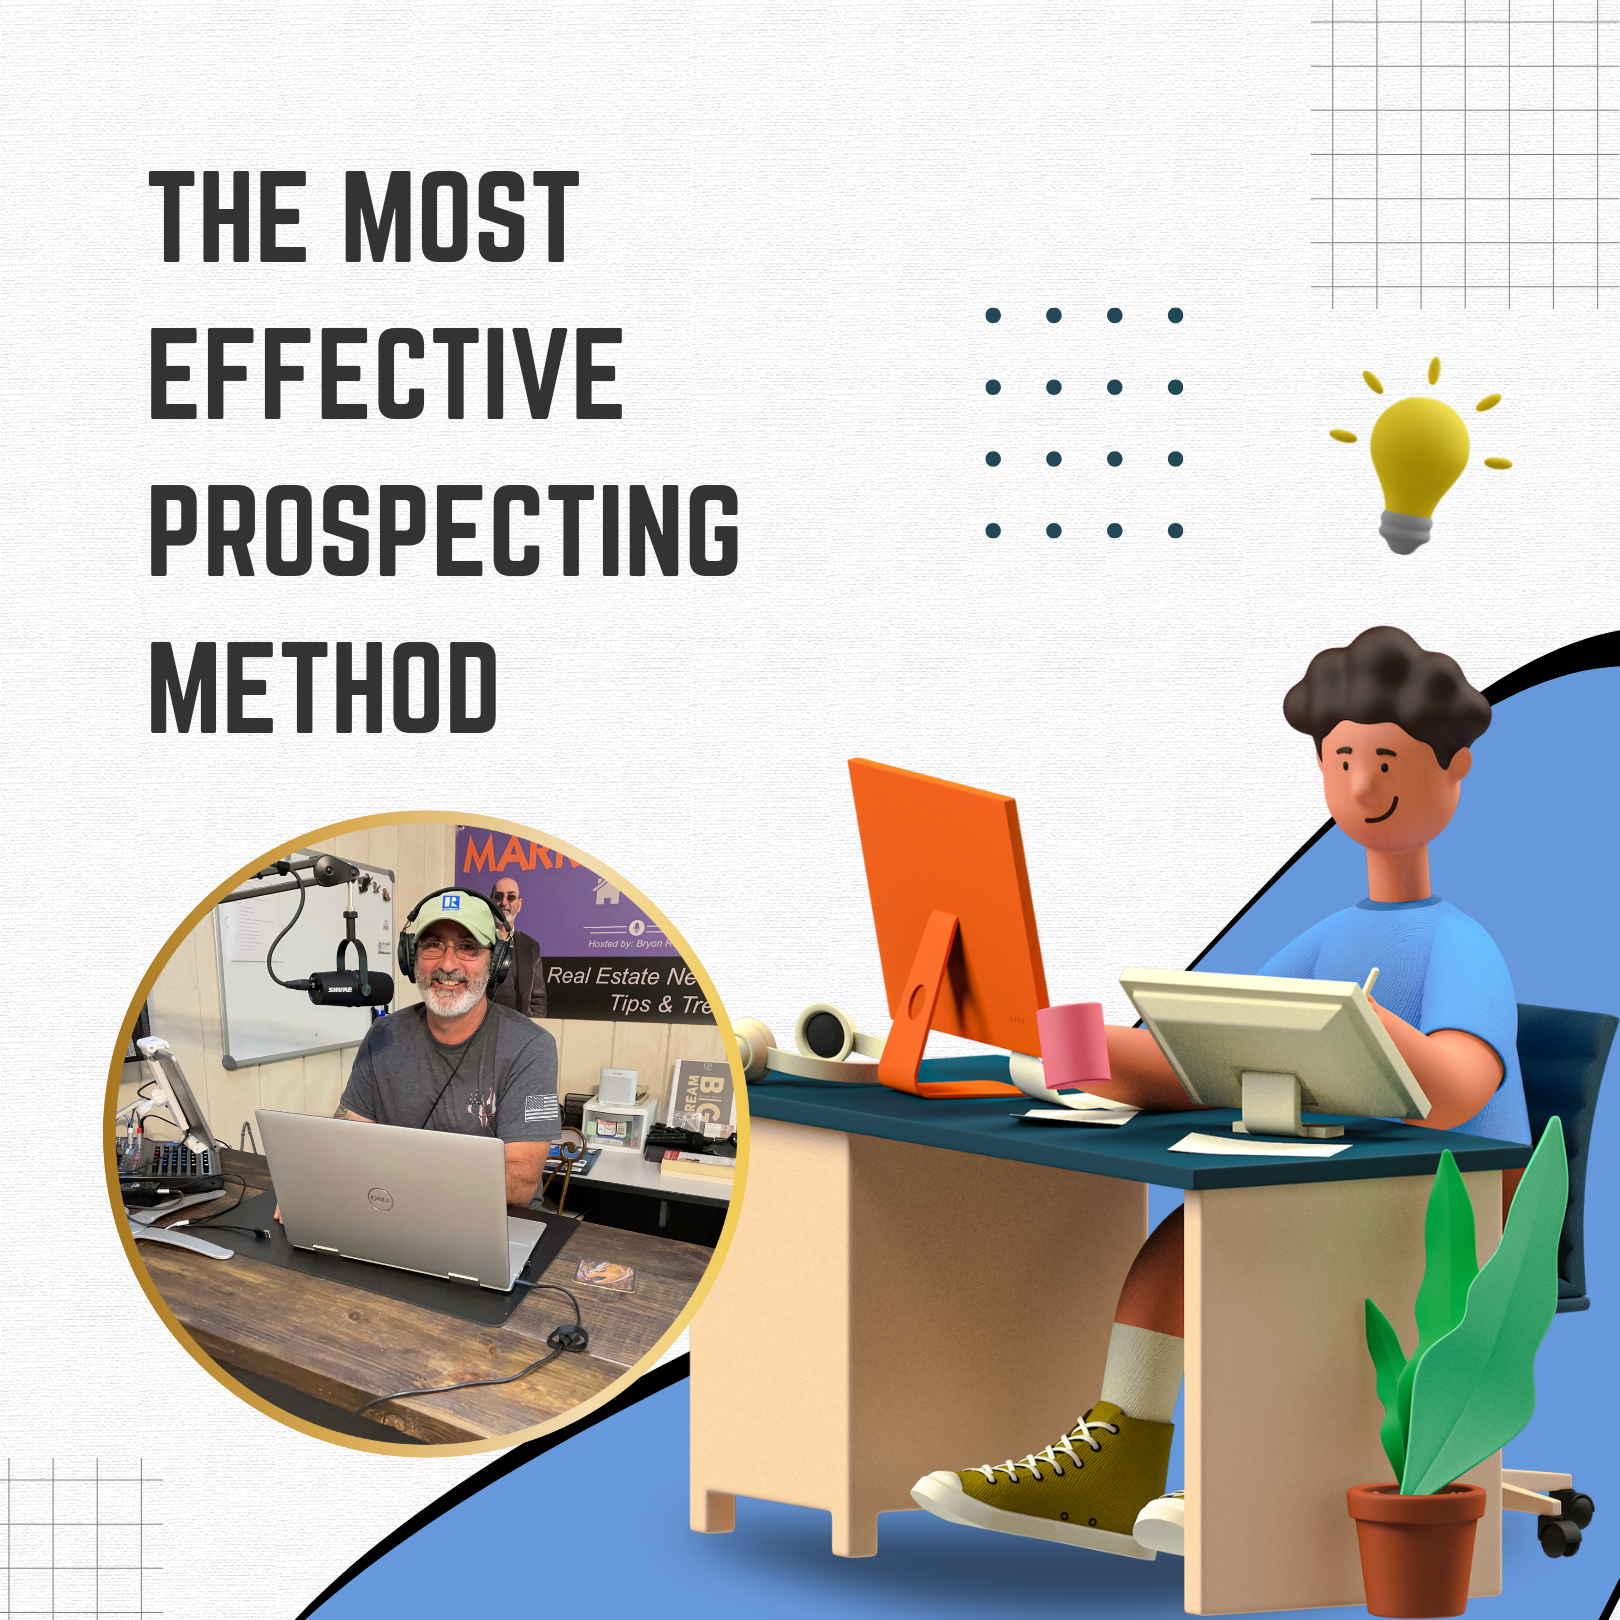 The most effective prospecting method